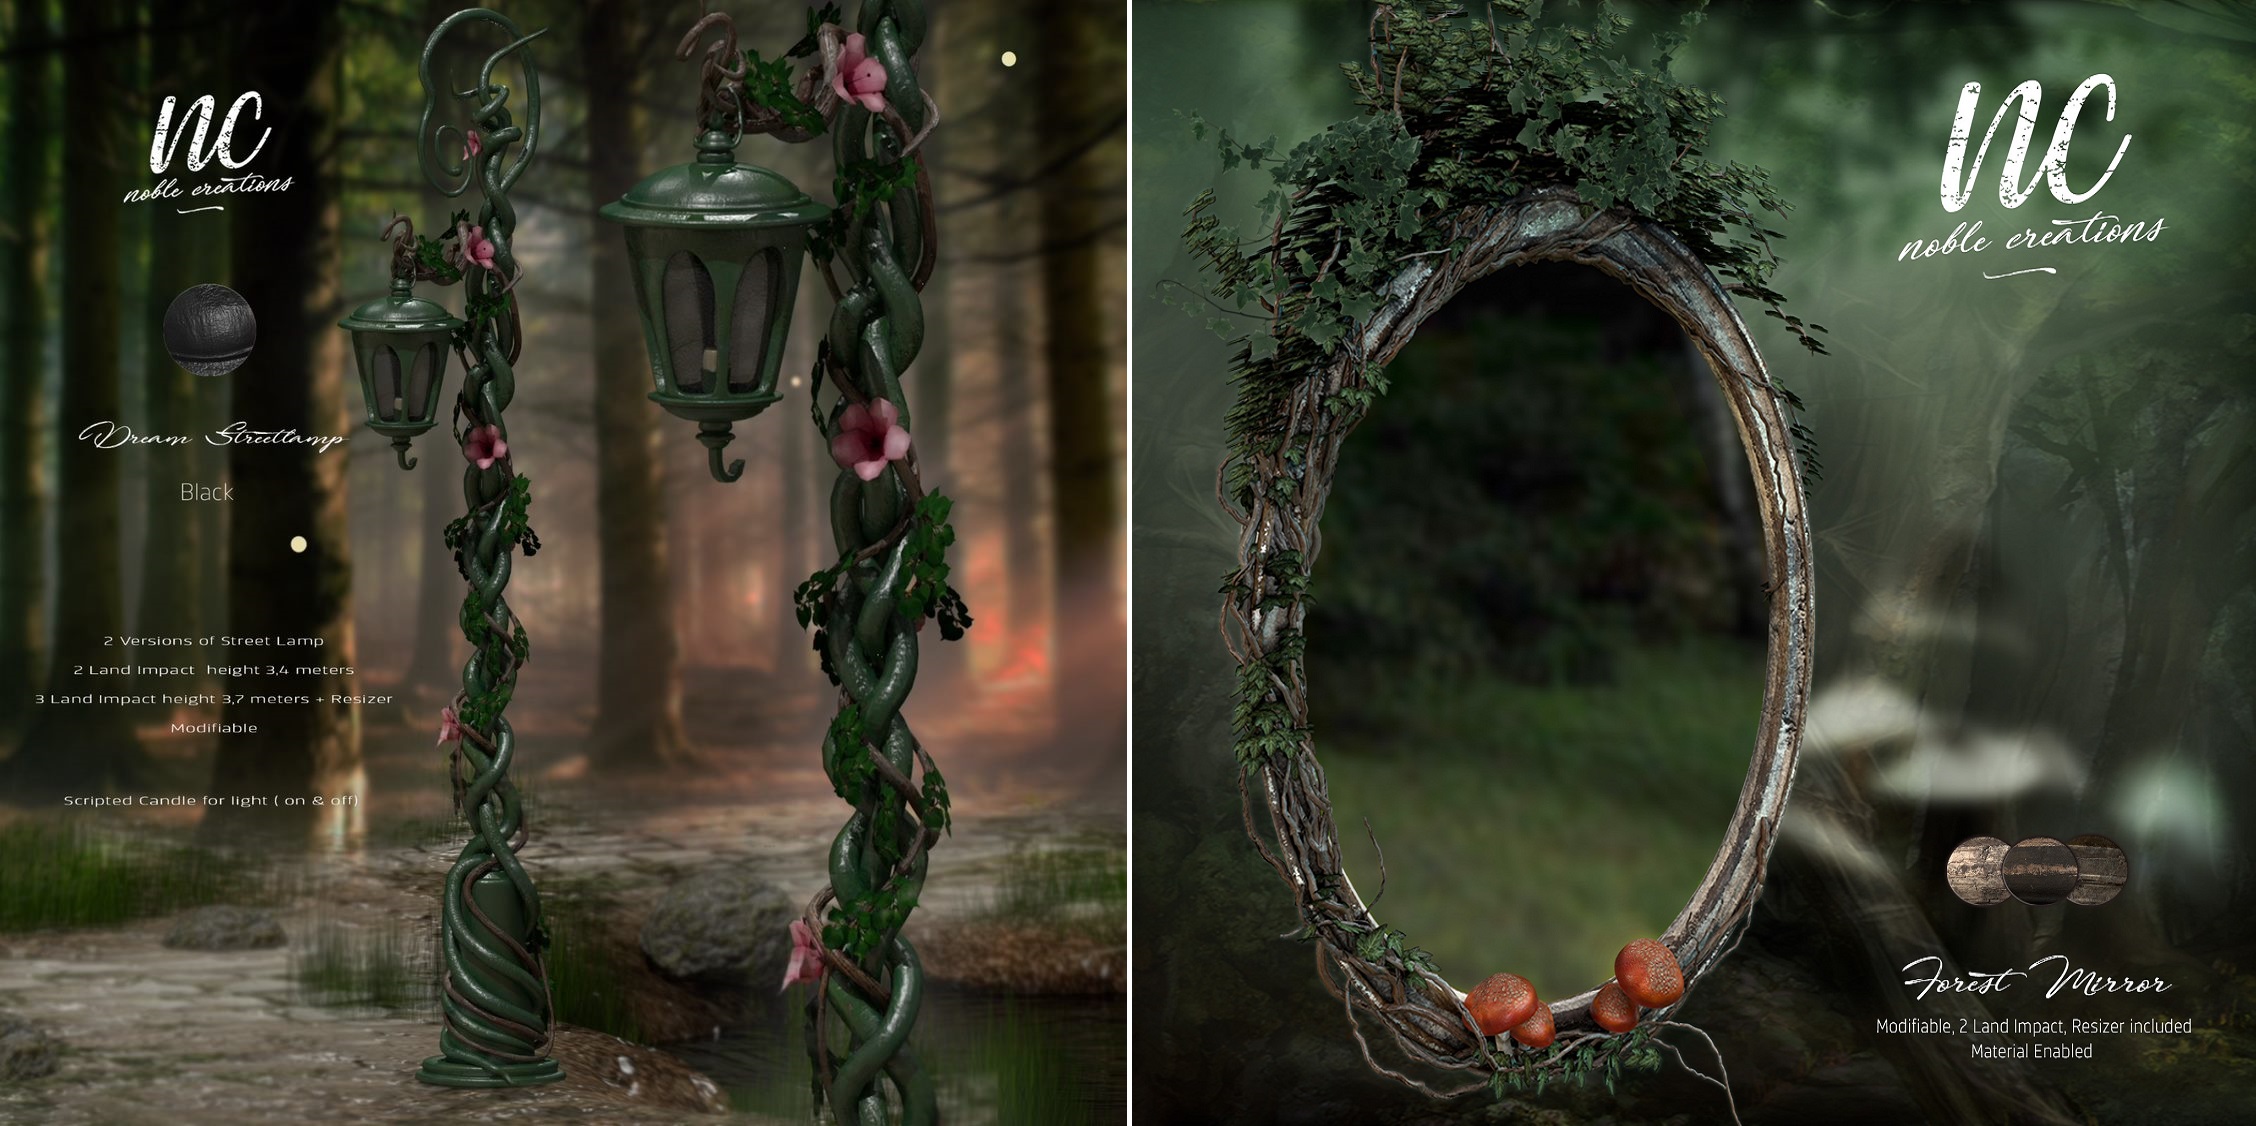 Noble Creations – Dream Streetlamp & Forest Mirror